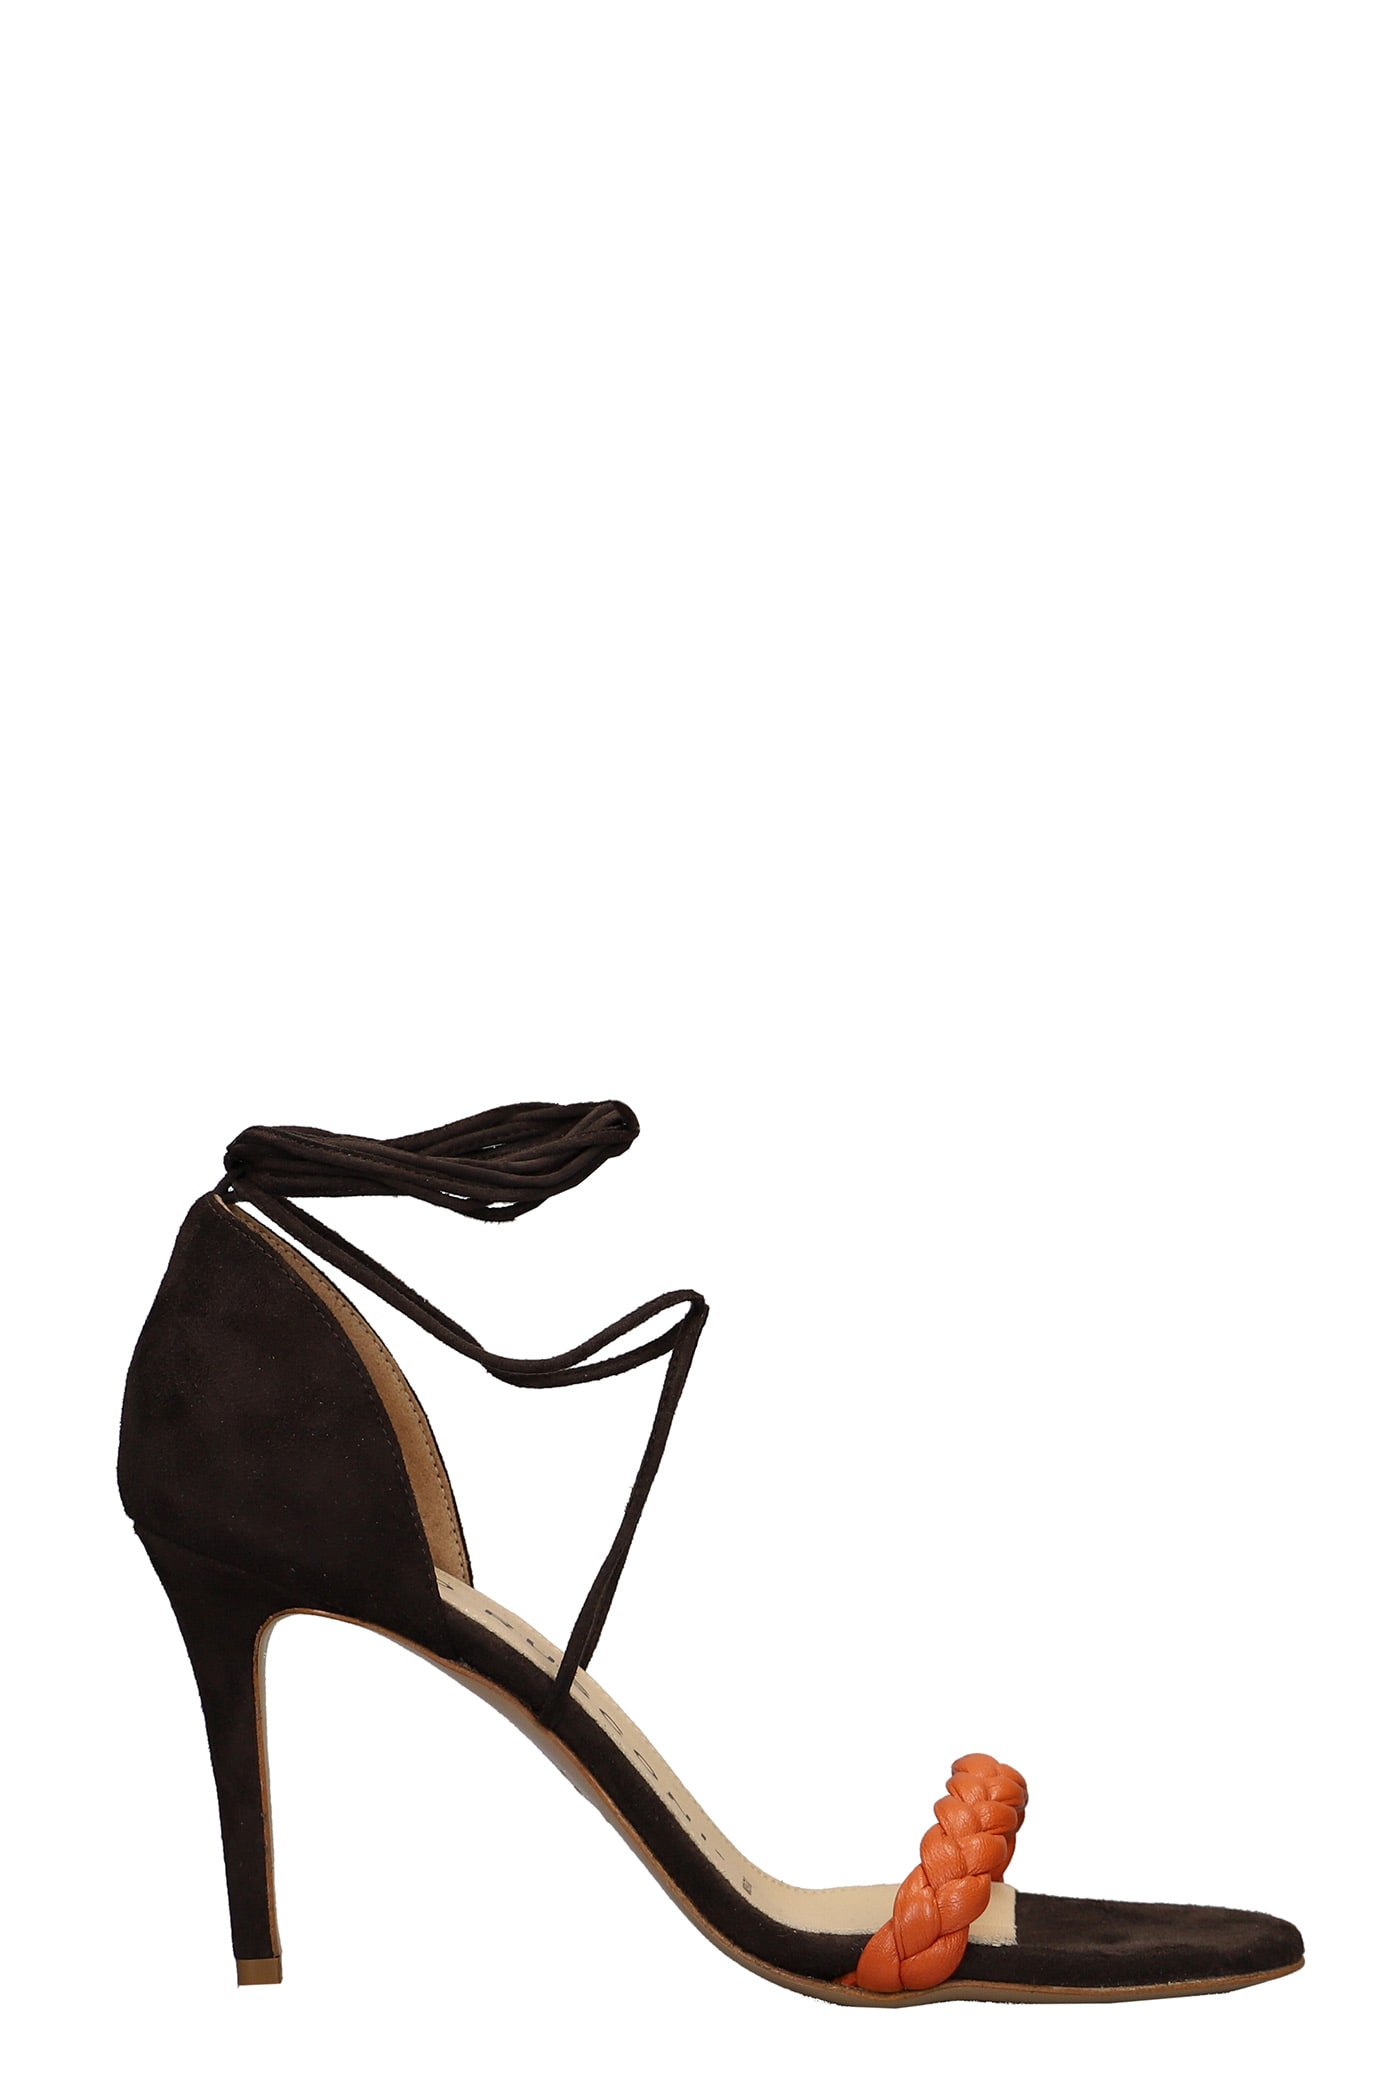 Fabio Rusconi Sandals In Dark Brown Suede And Leather